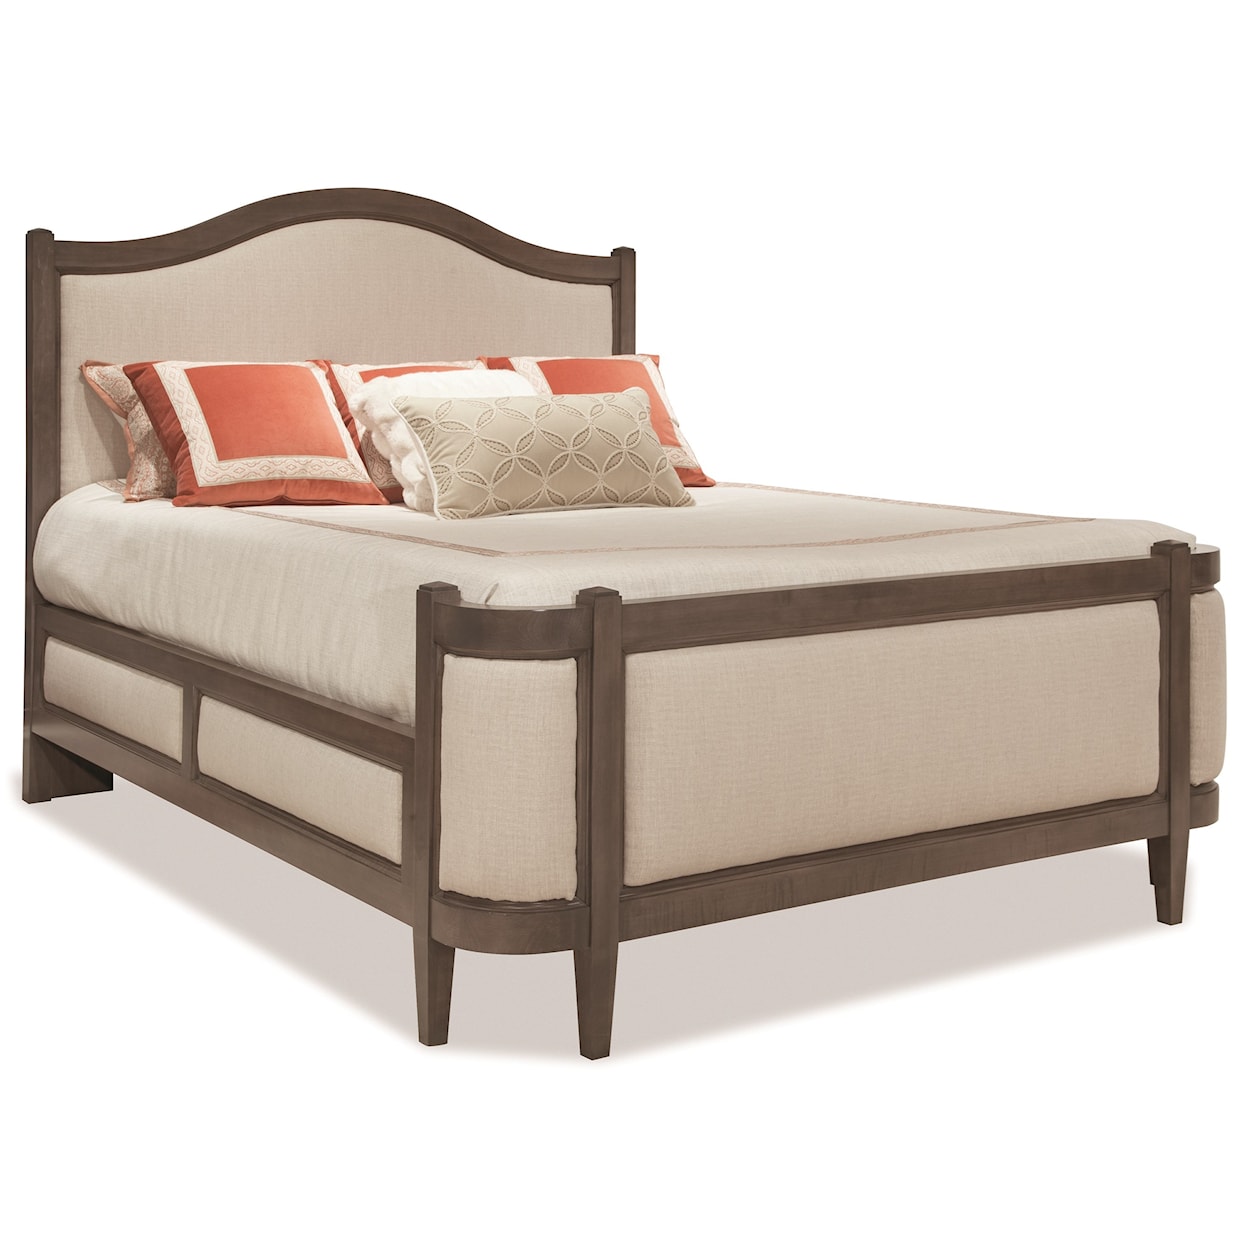 Durham Prominence Queen Grand Upholstered Bed